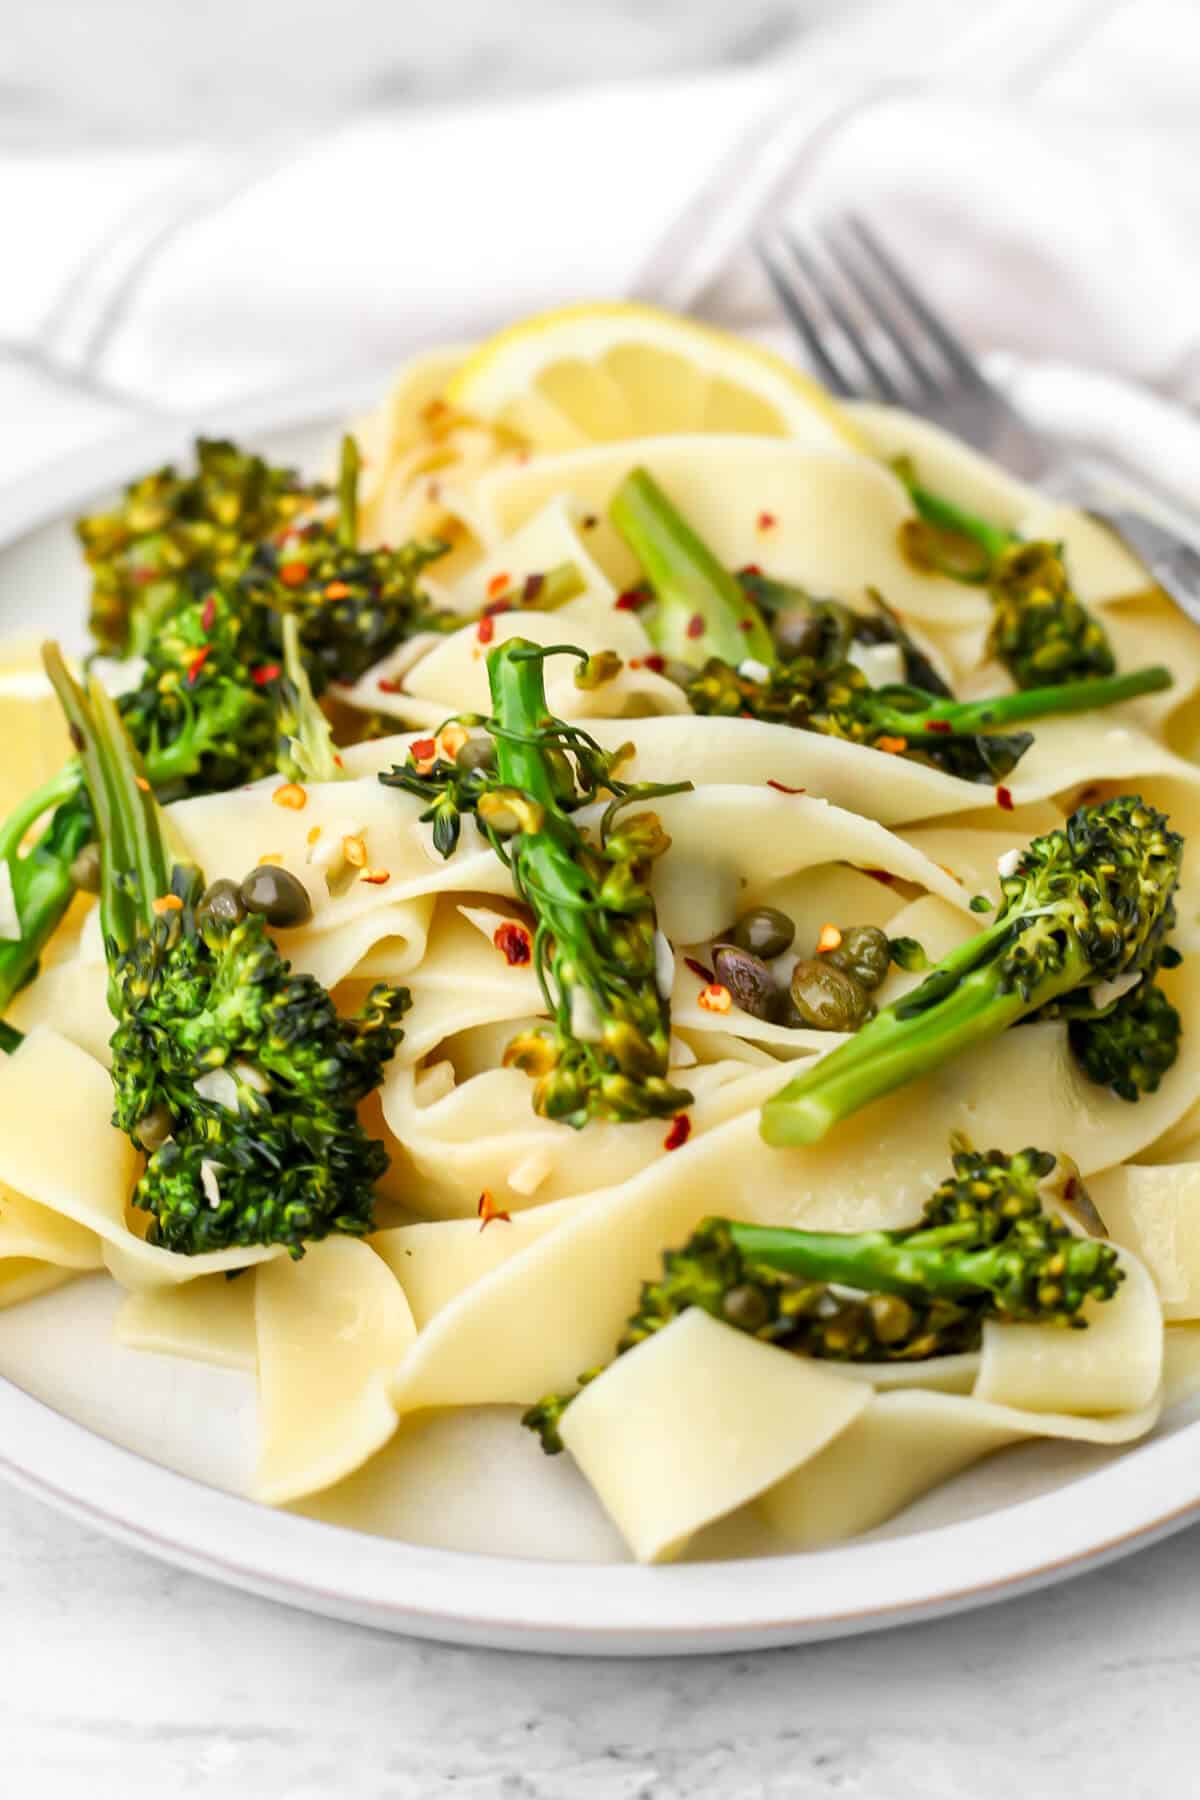 A plate full of broccolini pasta with a vegan lemon butter sauce with garlic and capers.